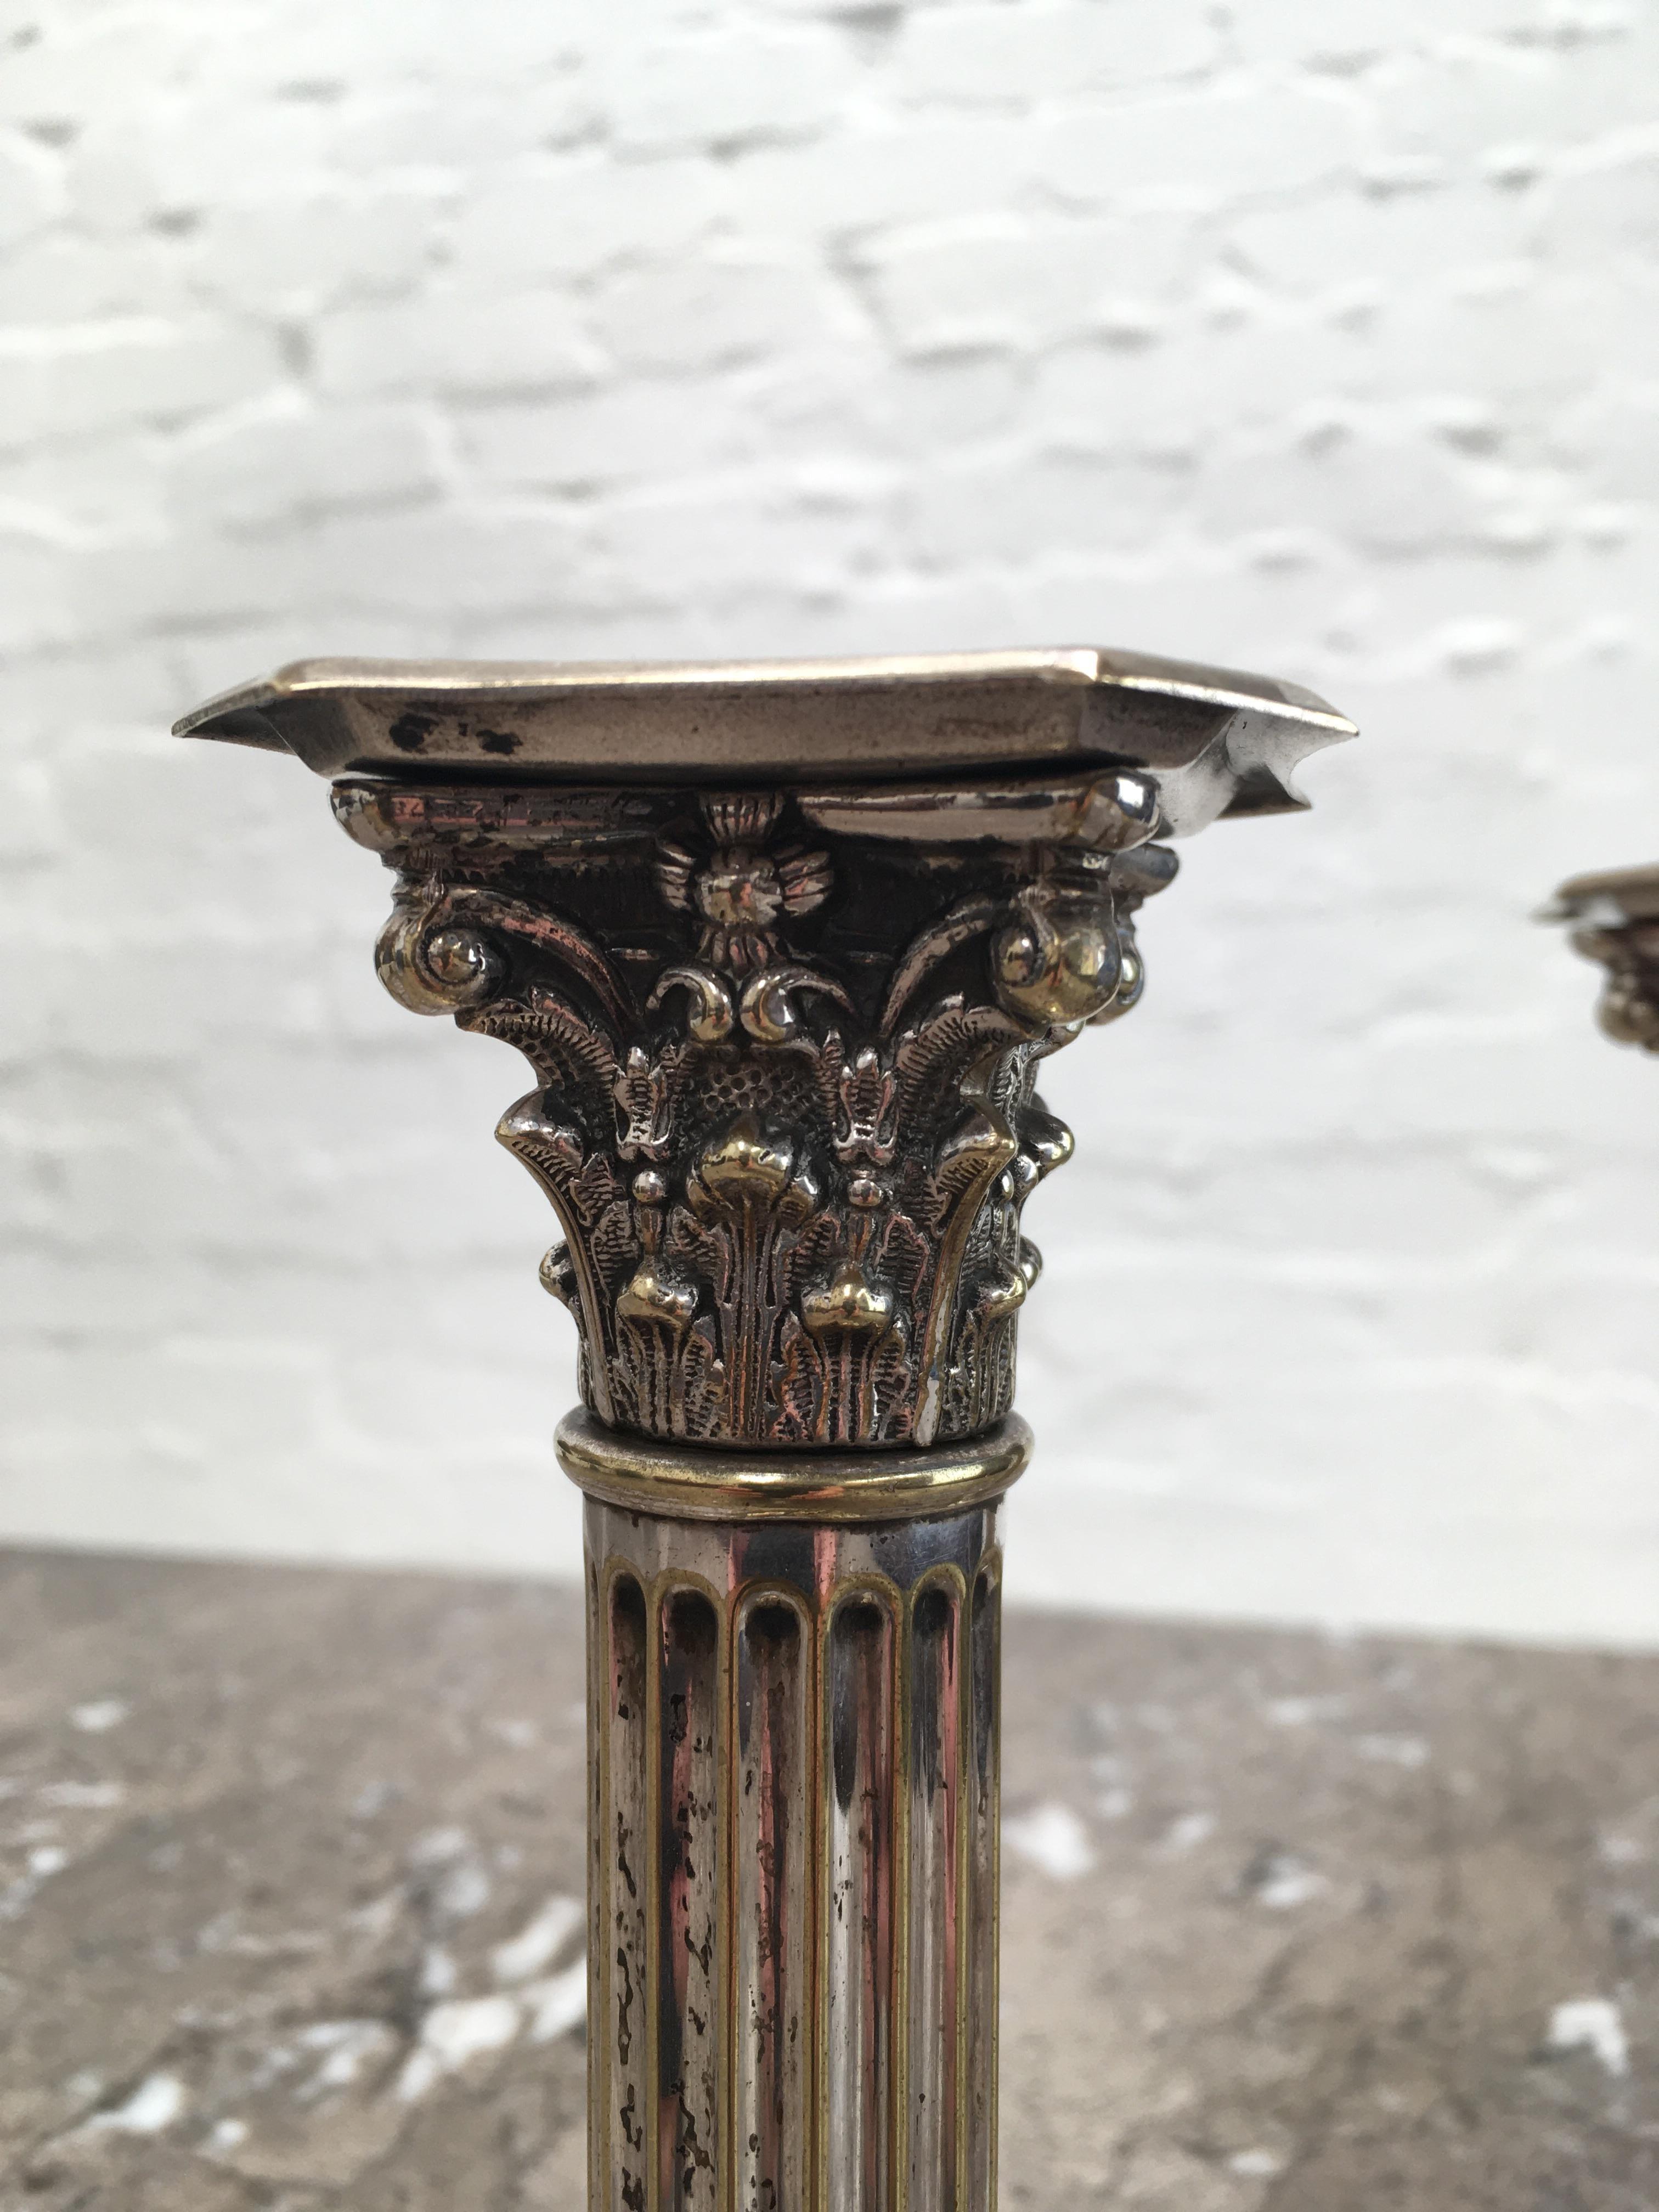 We present this pair of Edwardian candlesticks in aged, distressed condition. Perfect for a tableau of time-worn pieces or to enhance an historical interior or table setting. We particularly adore the Corinthian capitals, done in wonderful detail.